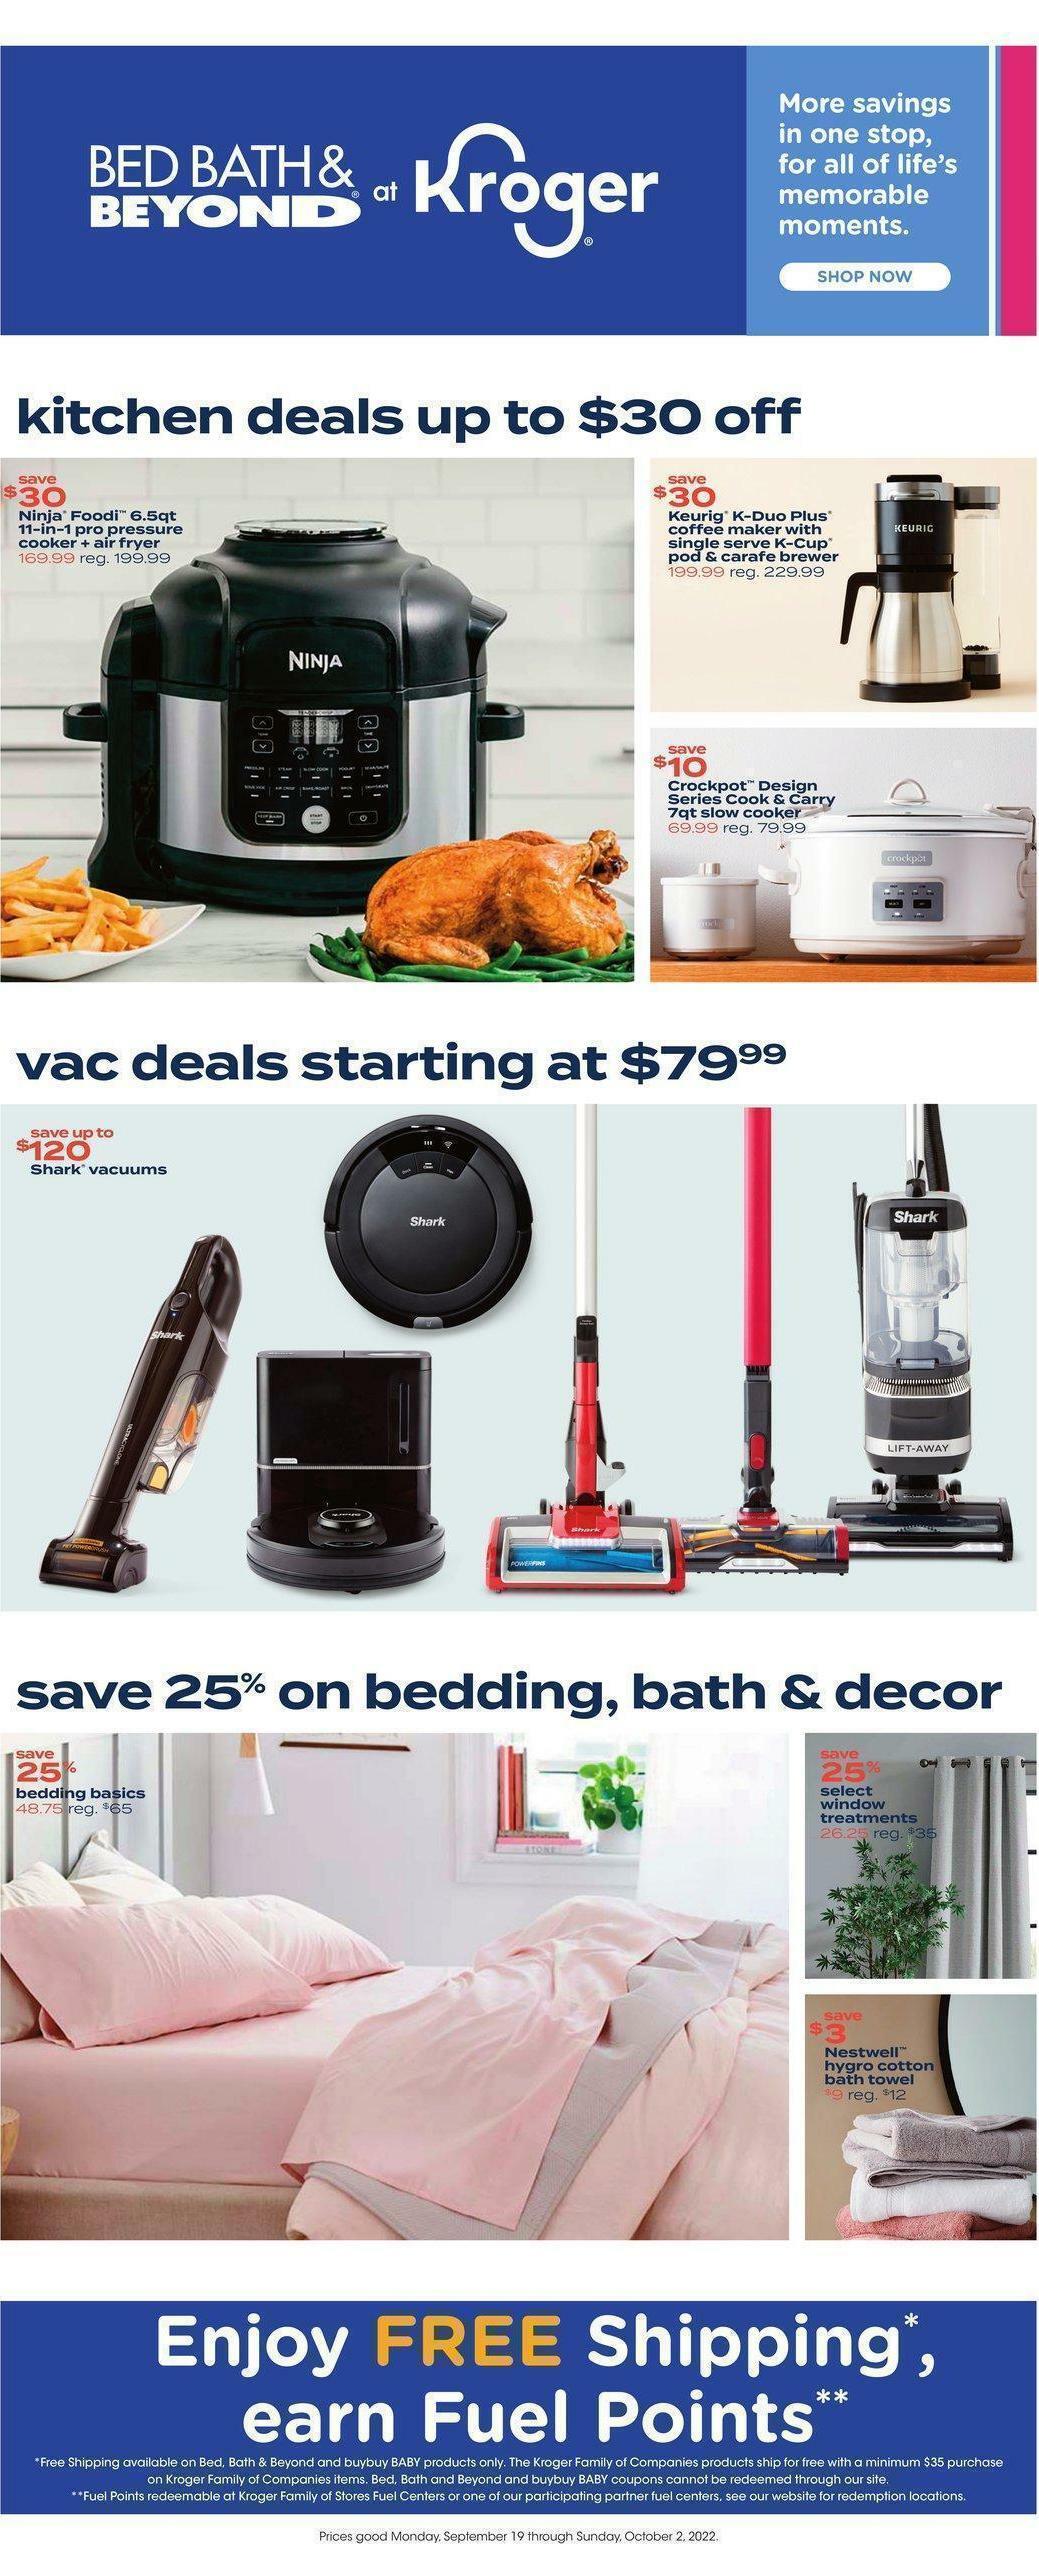 Kroger Bed, Bath & Beyond Weekly Ad from September 19